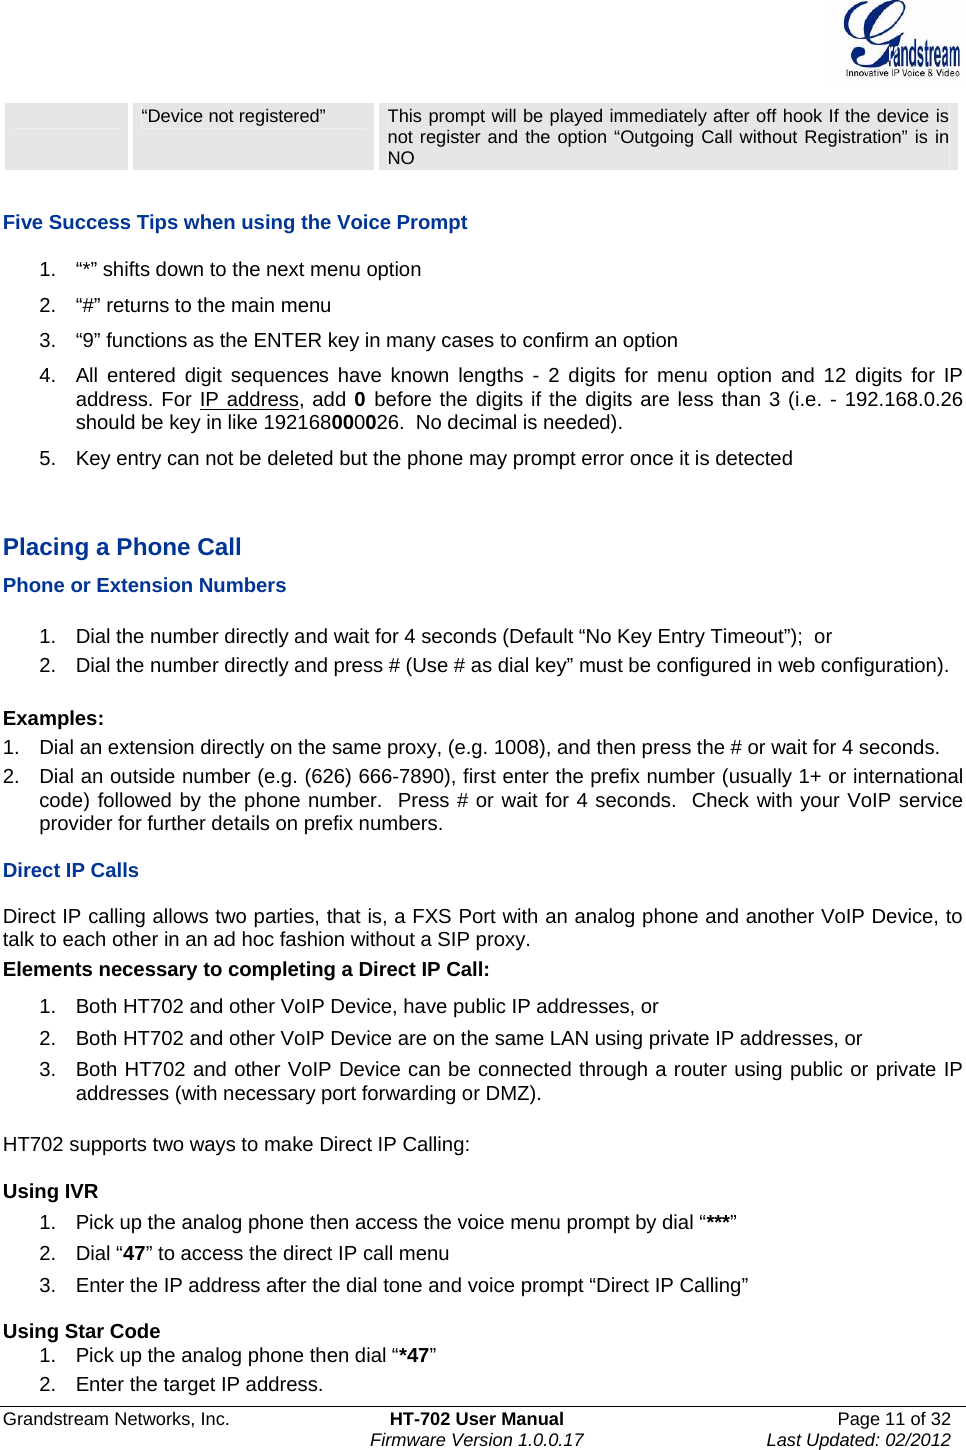  Grandstream Networks, Inc.  HT-702 User Manual  Page 11 of 32    Firmware Version 1.0.0.17  Last Updated: 02/2012   “Device not registered”  This prompt will be played immediately after off hook If the device is not register and the option “Outgoing Call without Registration” is in NO  Five Success Tips when using the Voice Prompt 1.  “*” shifts down to the next menu option 2.  “#” returns to the main menu 3.  “9” functions as the ENTER key in many cases to confirm an option 4.  All entered digit sequences have known lengths - 2 digits for menu option and 12 digits for IP address. For IP address, add 0 before the digits if the digits are less than 3 (i.e. - 192.168.0.26 should be key in like 192168000026.  No decimal is needed).  5.  Key entry can not be deleted but the phone may prompt error once it is detected   Placing a Phone Call Phone or Extension Numbers  1.  Dial the number directly and wait for 4 seconds (Default “No Key Entry Timeout”);  or 2.  Dial the number directly and press # (Use # as dial key” must be configured in web configuration).  Examples: 1.  Dial an extension directly on the same proxy, (e.g. 1008), and then press the # or wait for 4 seconds.  2.  Dial an outside number (e.g. (626) 666-7890), first enter the prefix number (usually 1+ or international code) followed by the phone number.  Press # or wait for 4 seconds.  Check with your VoIP service provider for further details on prefix numbers.  Direct IP Calls  Direct IP calling allows two parties, that is, a FXS Port with an analog phone and another VoIP Device, to talk to each other in an ad hoc fashion without a SIP proxy.  Elements necessary to completing a Direct IP Call:  1.  Both HT702 and other VoIP Device, have public IP addresses, or  2.  Both HT702 and other VoIP Device are on the same LAN using private IP addresses, or  3.  Both HT702 and other VoIP Device can be connected through a router using public or private IP addresses (with necessary port forwarding or DMZ).   HT702 supports two ways to make Direct IP Calling:  Using IVR 1.  Pick up the analog phone then access the voice menu prompt by dial “***” 2. Dial “47” to access the direct IP call menu 3.  Enter the IP address after the dial tone and voice prompt “Direct IP Calling”   Using Star Code 1.  Pick up the analog phone then dial “*47” 2.  Enter the target IP address. 